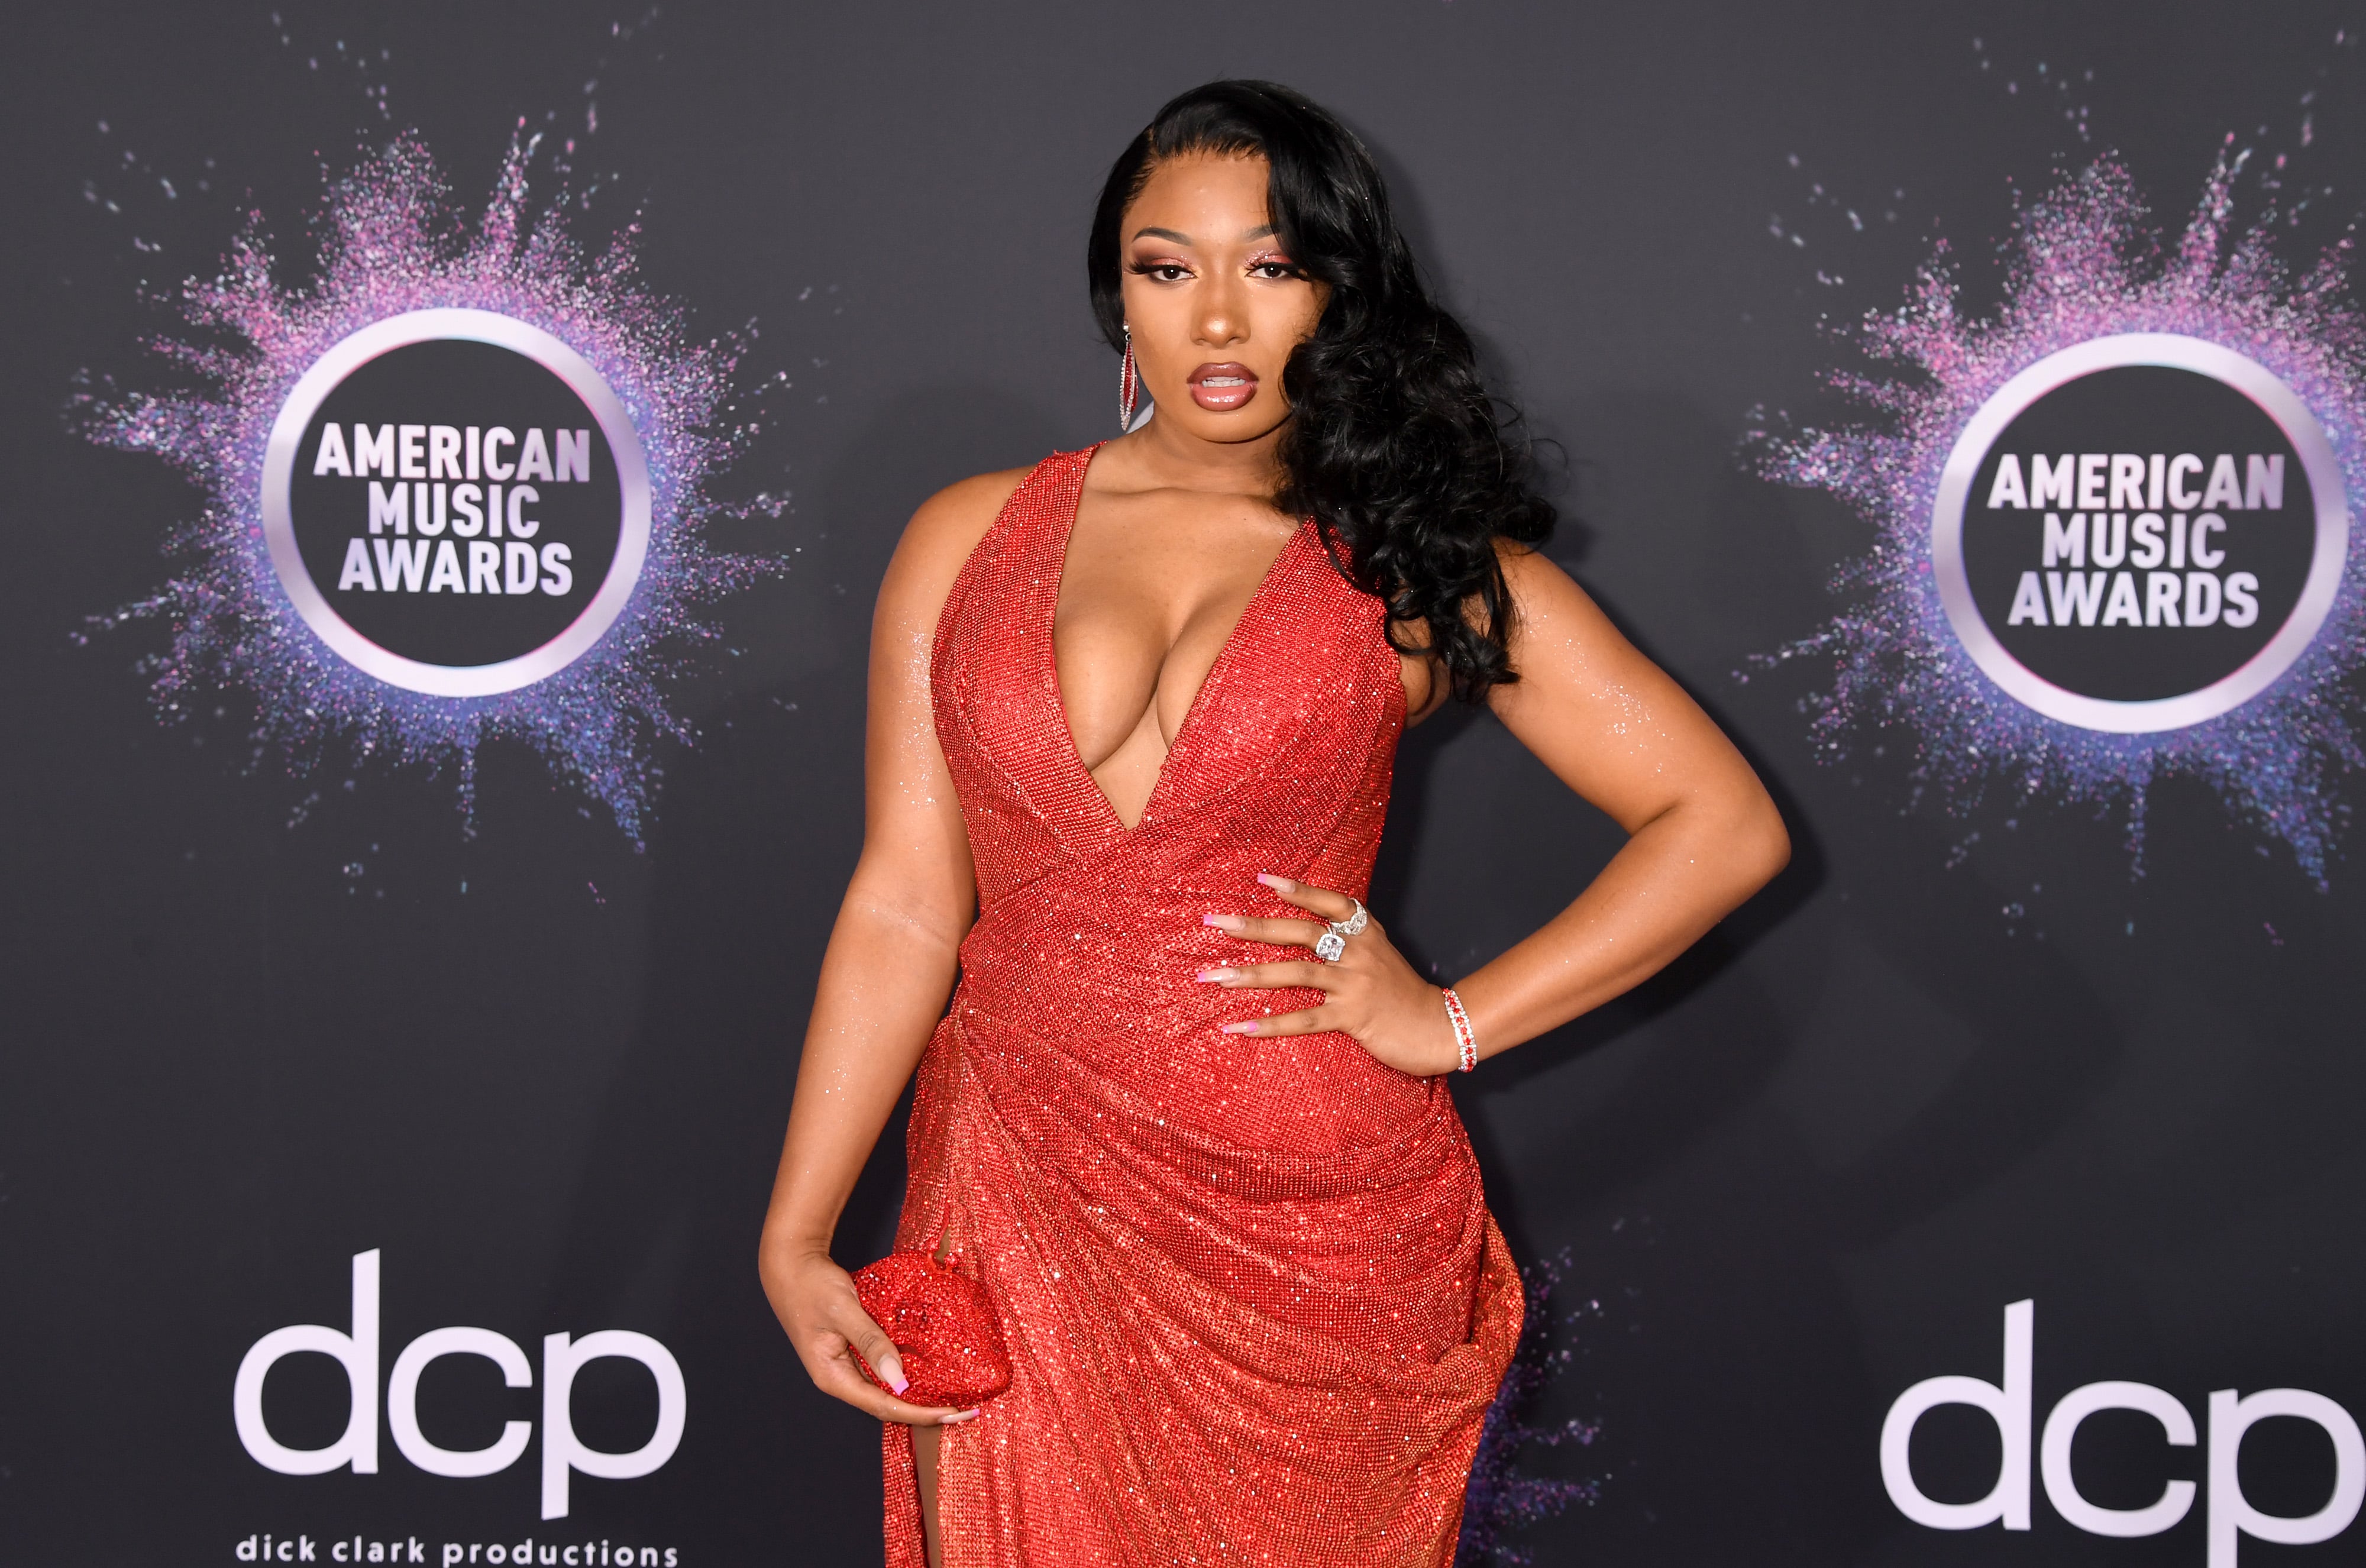 Fascinating Facts About Megan Thee Stallion